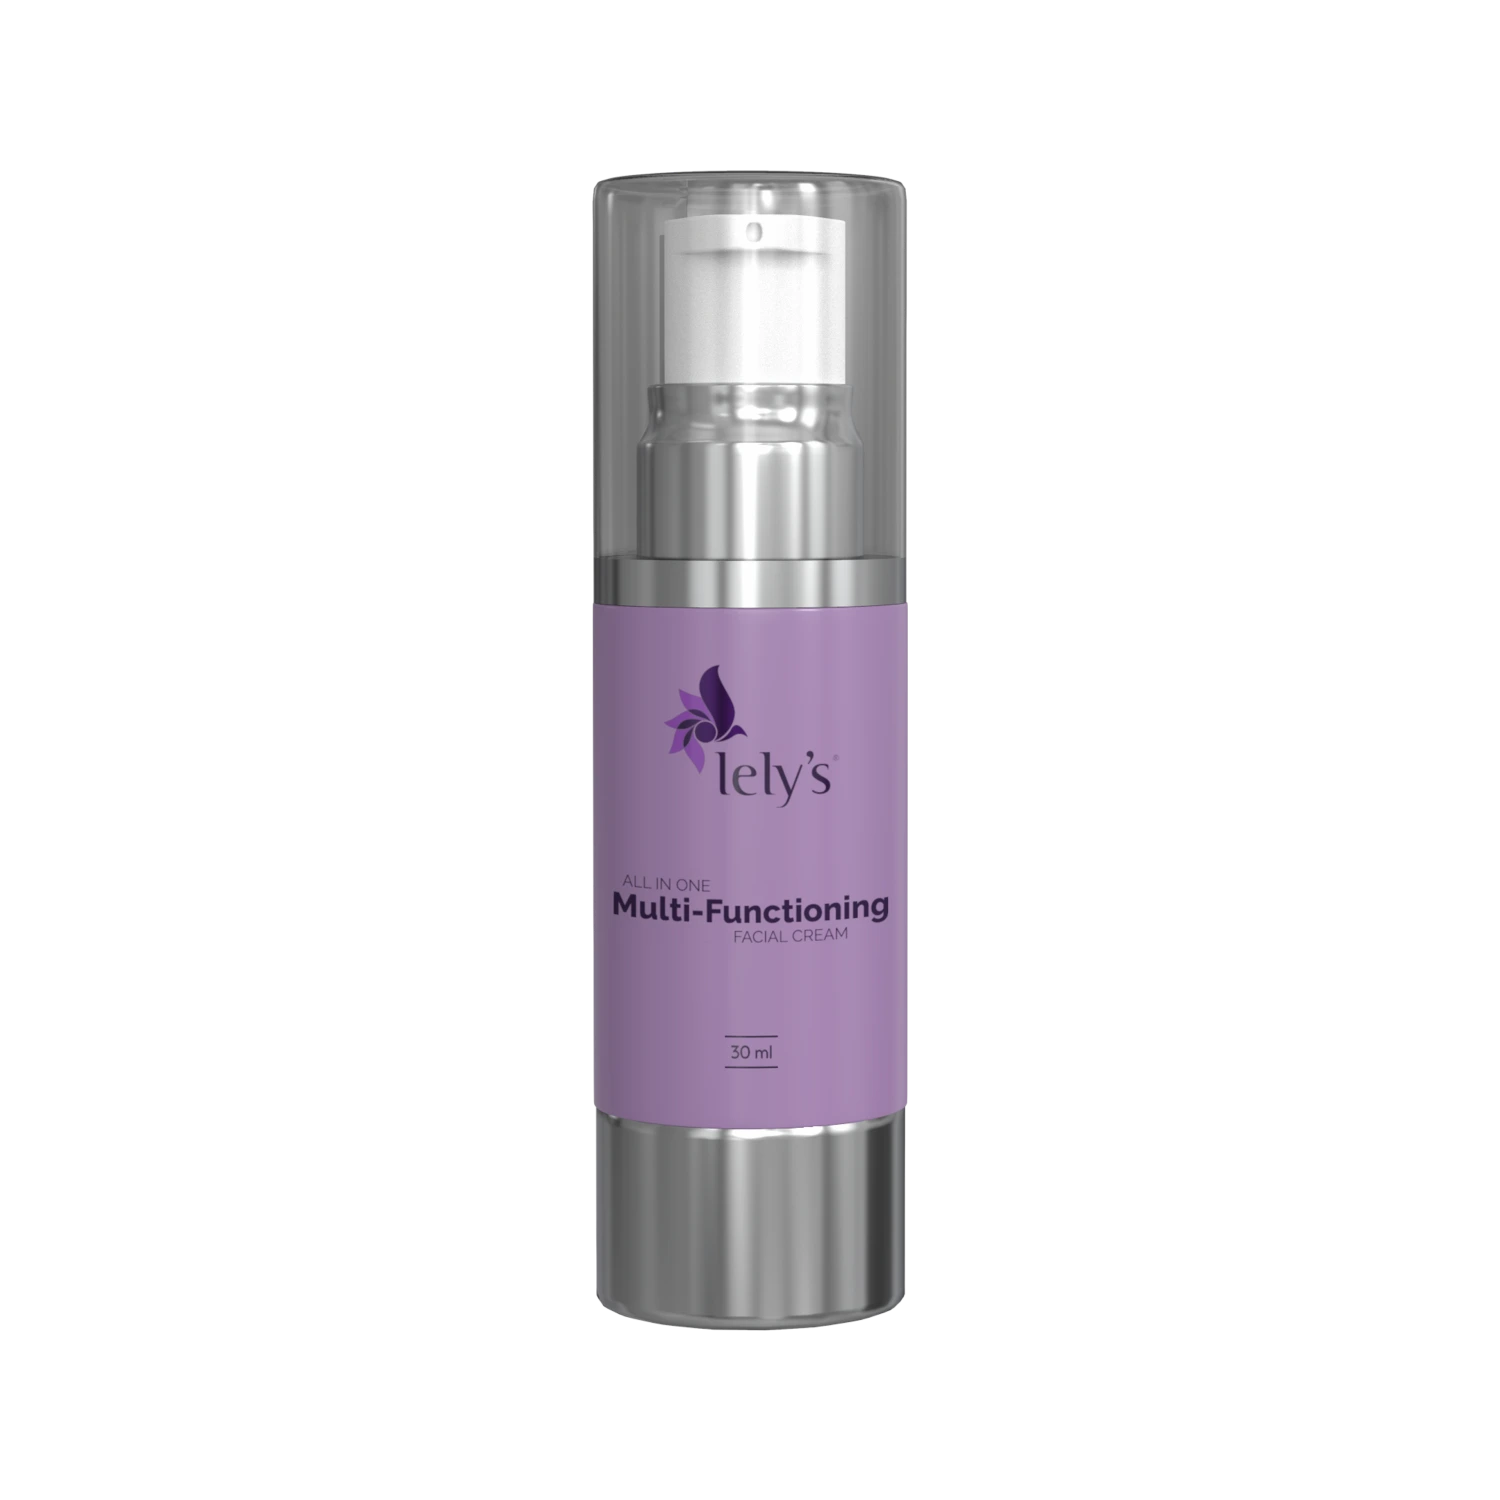 All-In-One Multi-Functioning Face Cream